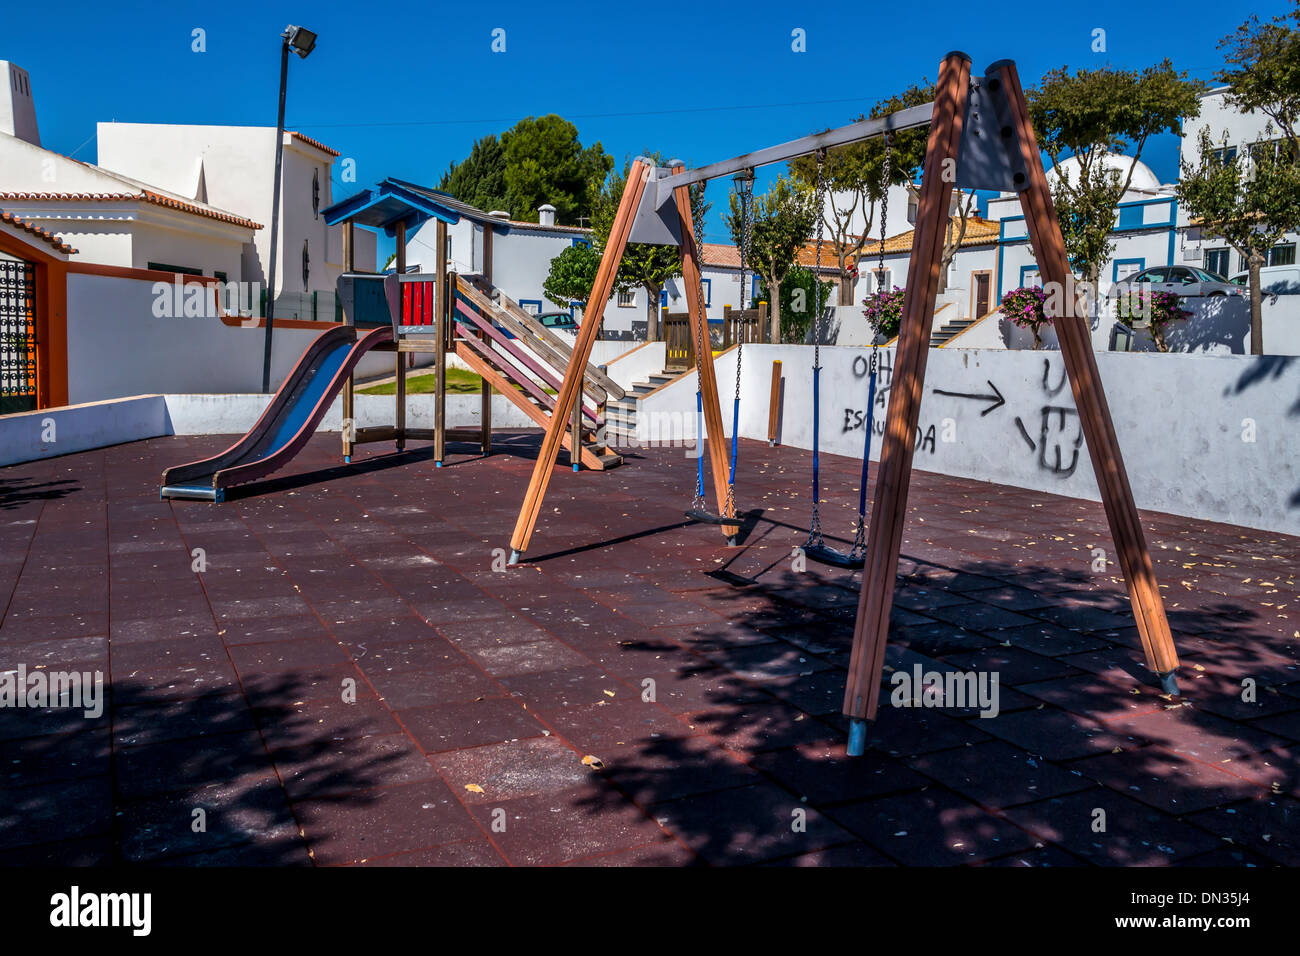 an empty children's playground with slides and swings with graffito on the wall, Stock Photo